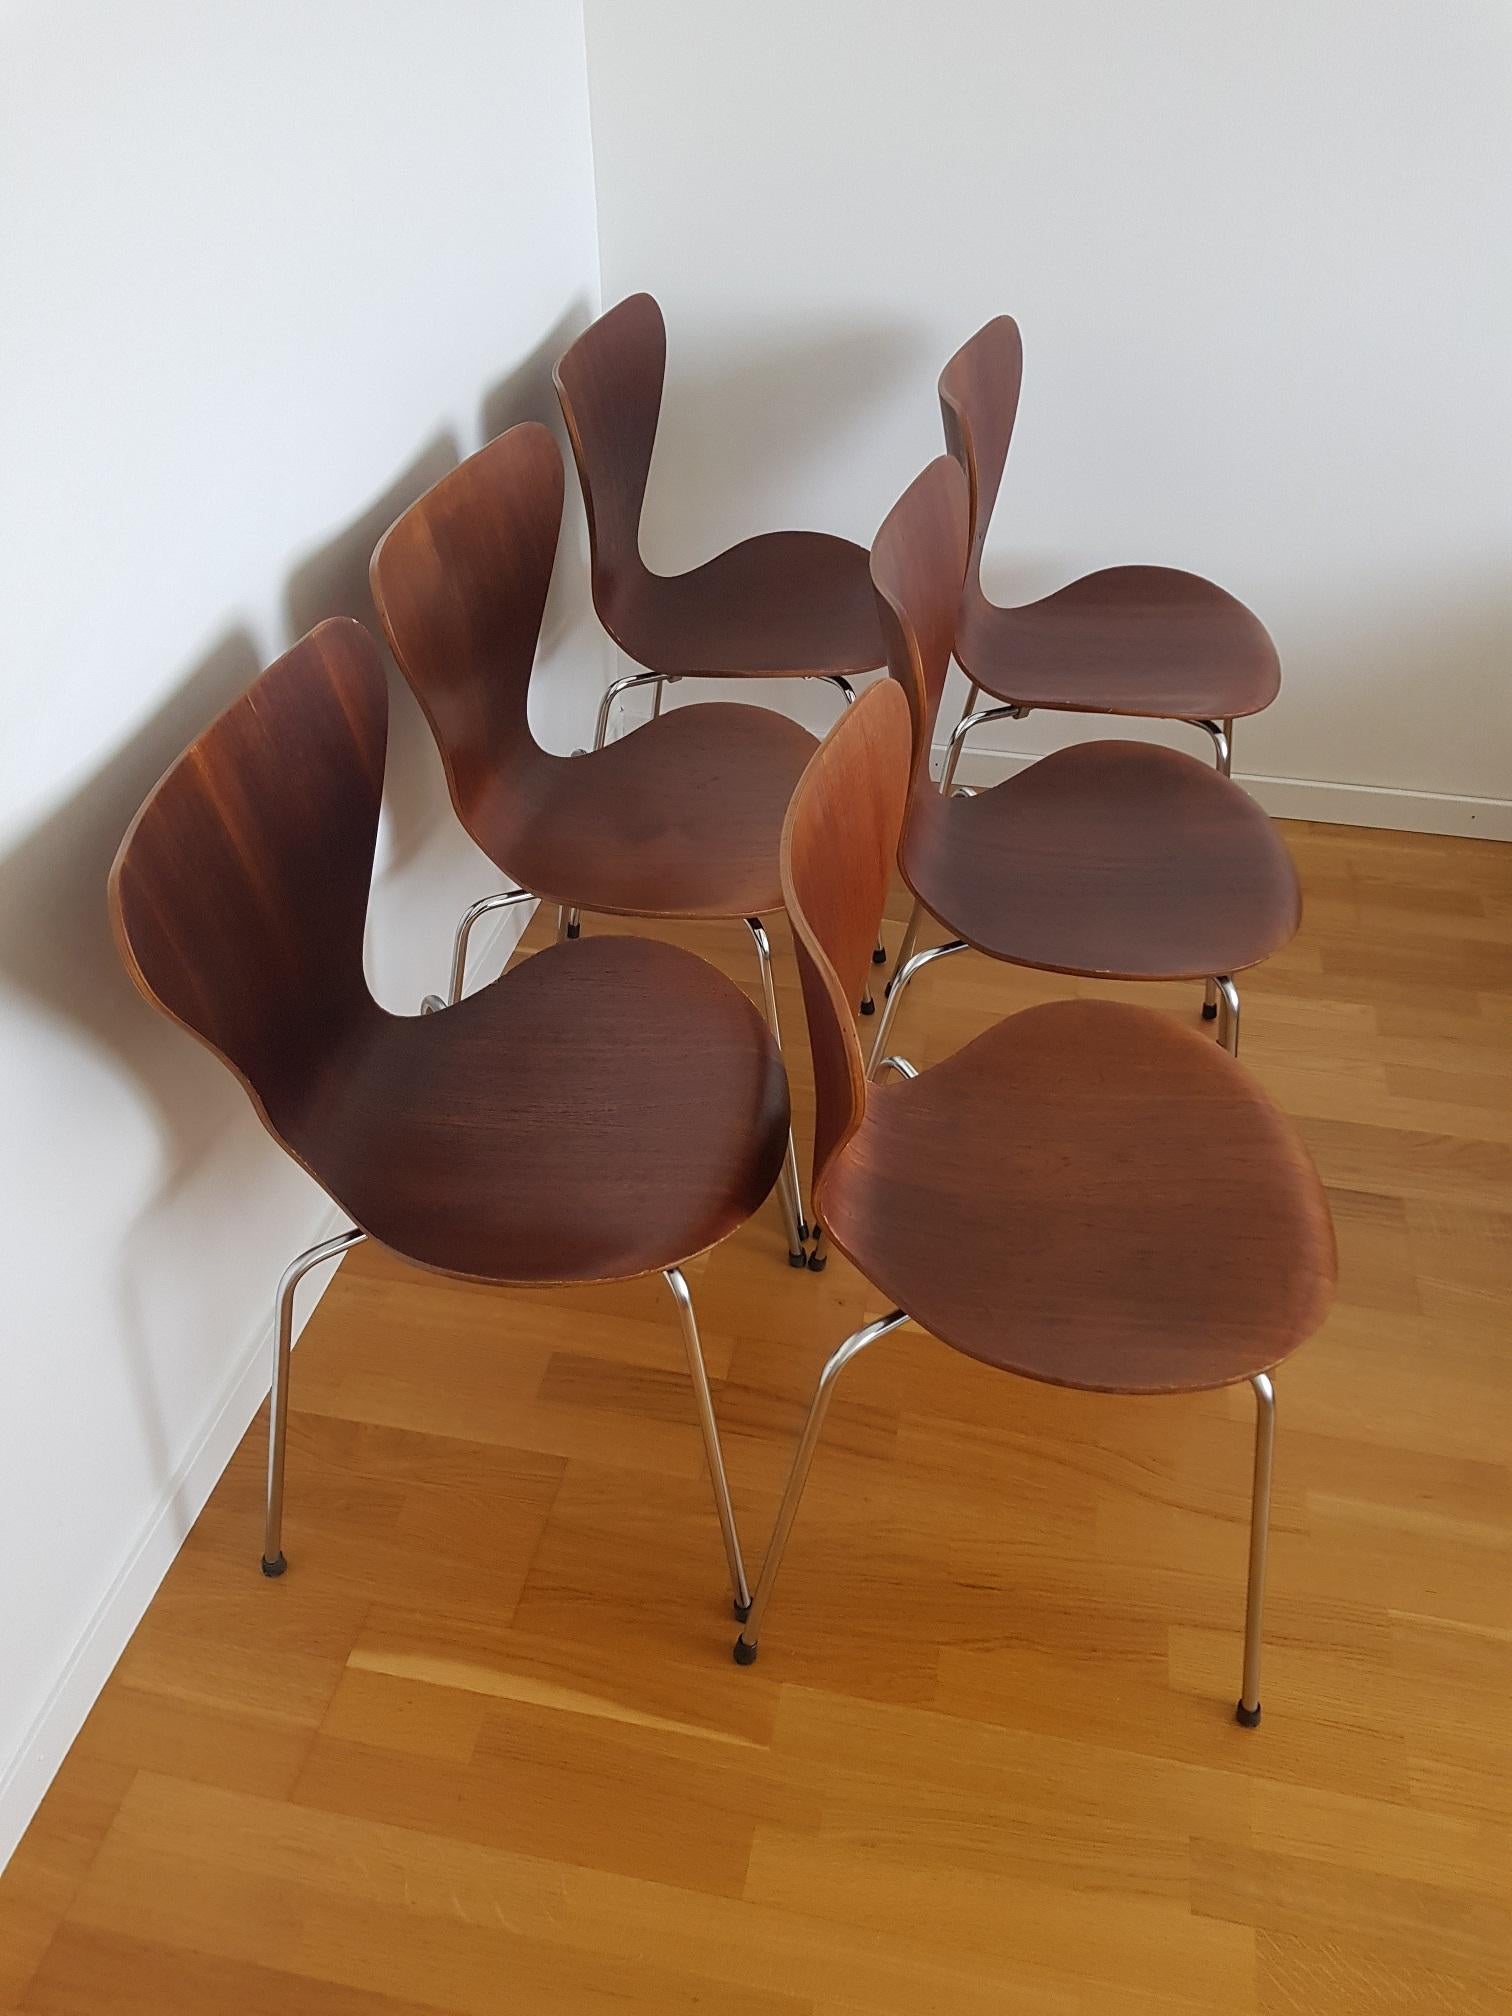 20th Century 6 Vintage Series 7 Chairs 3107 in Teak 1960s by Arne Jacobsen for Fritz Hansen For Sale